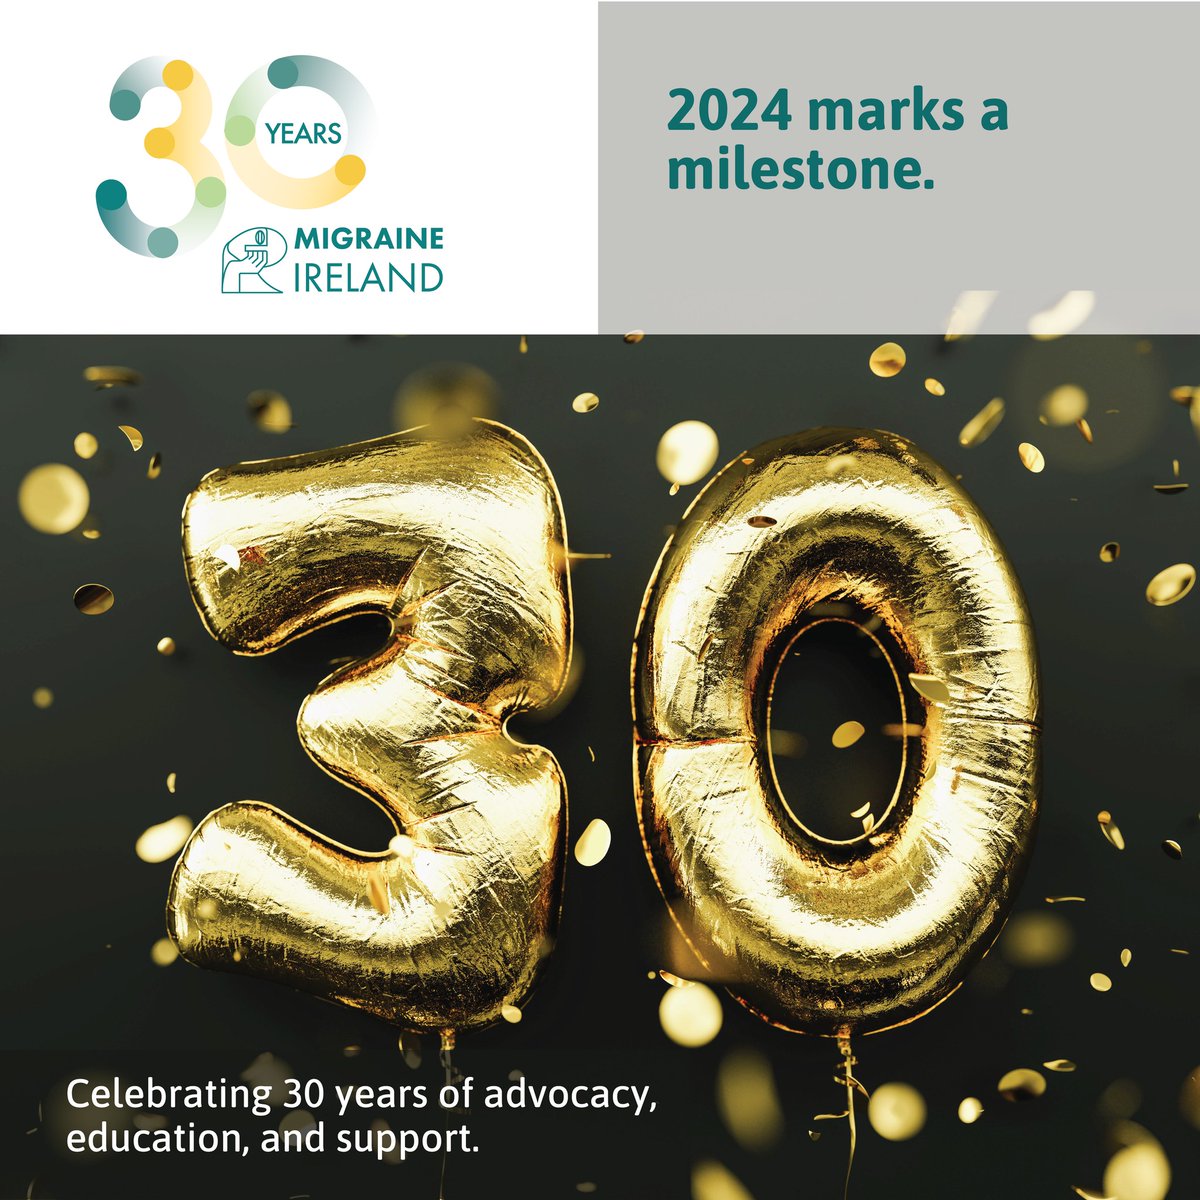 Join @MigraineIreland as we celebrate 30 years of #advocacy, #education, and #support. We're proud to work towards improving the lives of those affected by migraine. Learn more about our journey here: shorturl.at/dfLY6 #notjustaheadache #celebrating30years